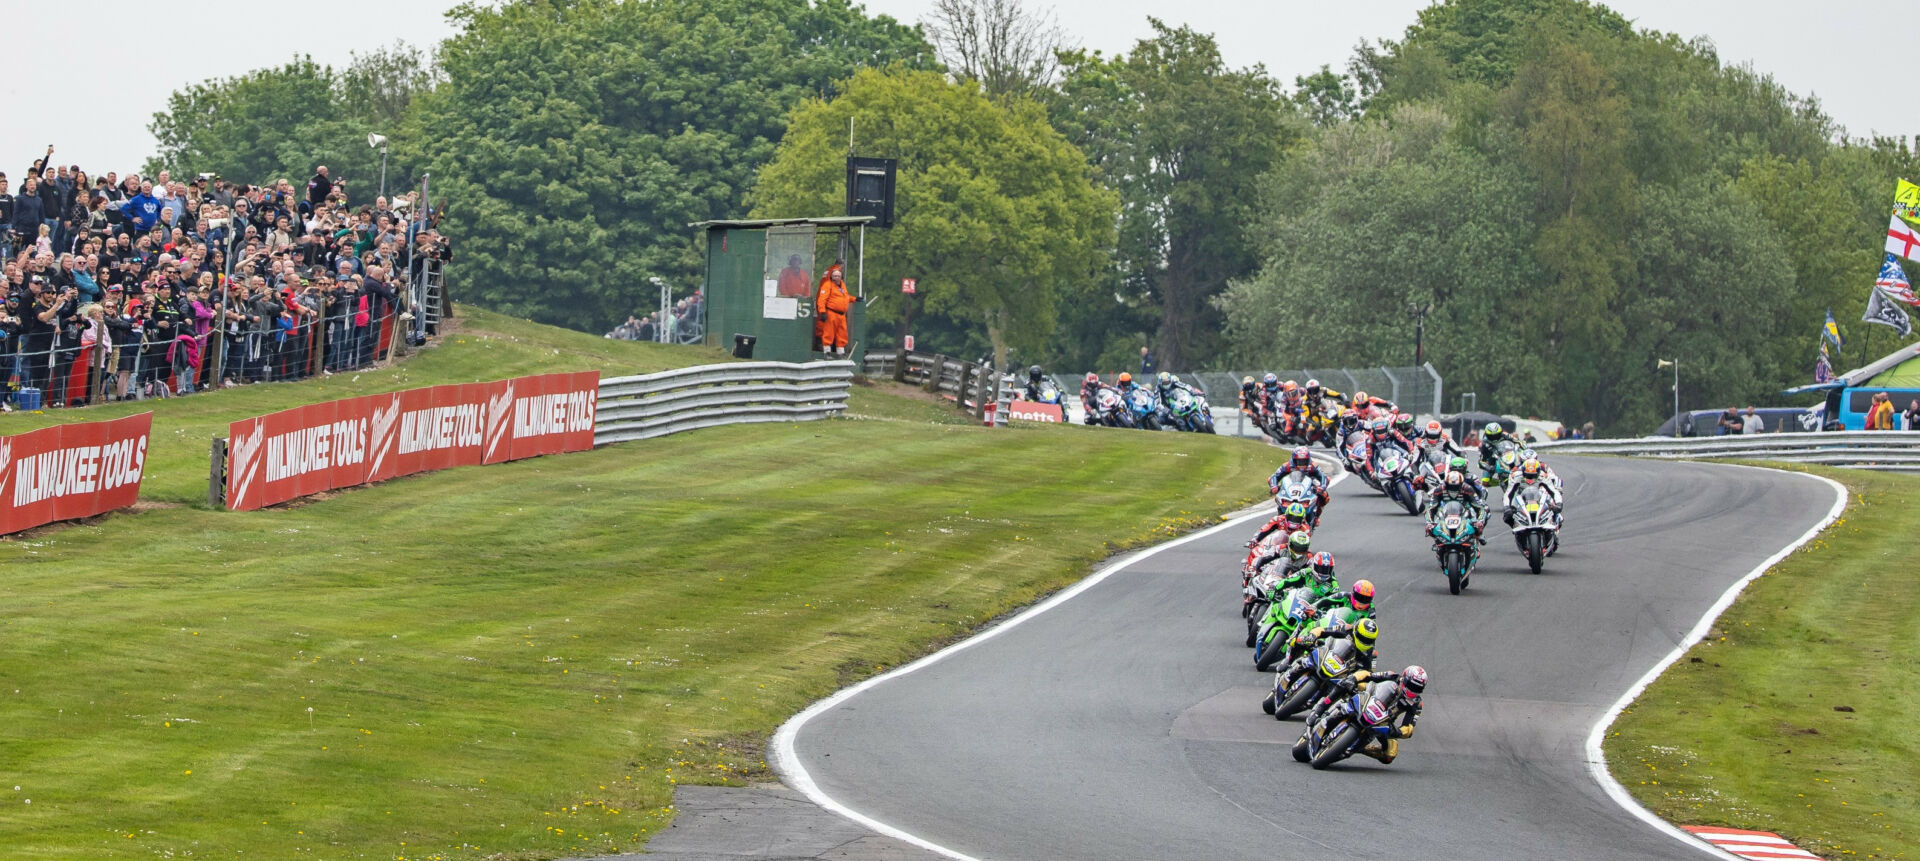 The start of a British Superbike race Monday at Oulton Park. Photo courtesy MSVR.